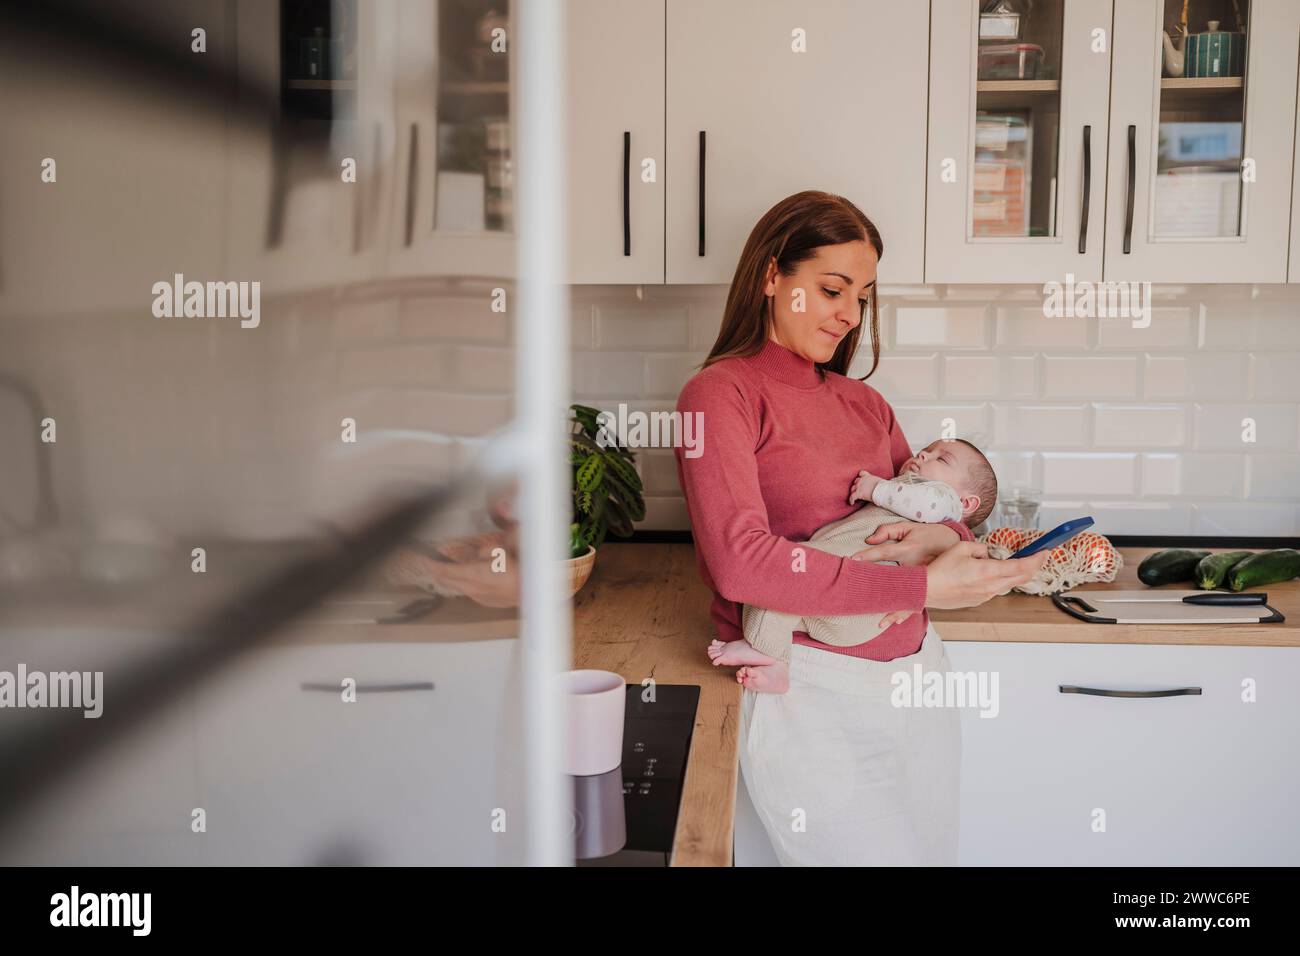 Woman carrying sleeping baby daughter and using smart phone in kitchen Stock Photo